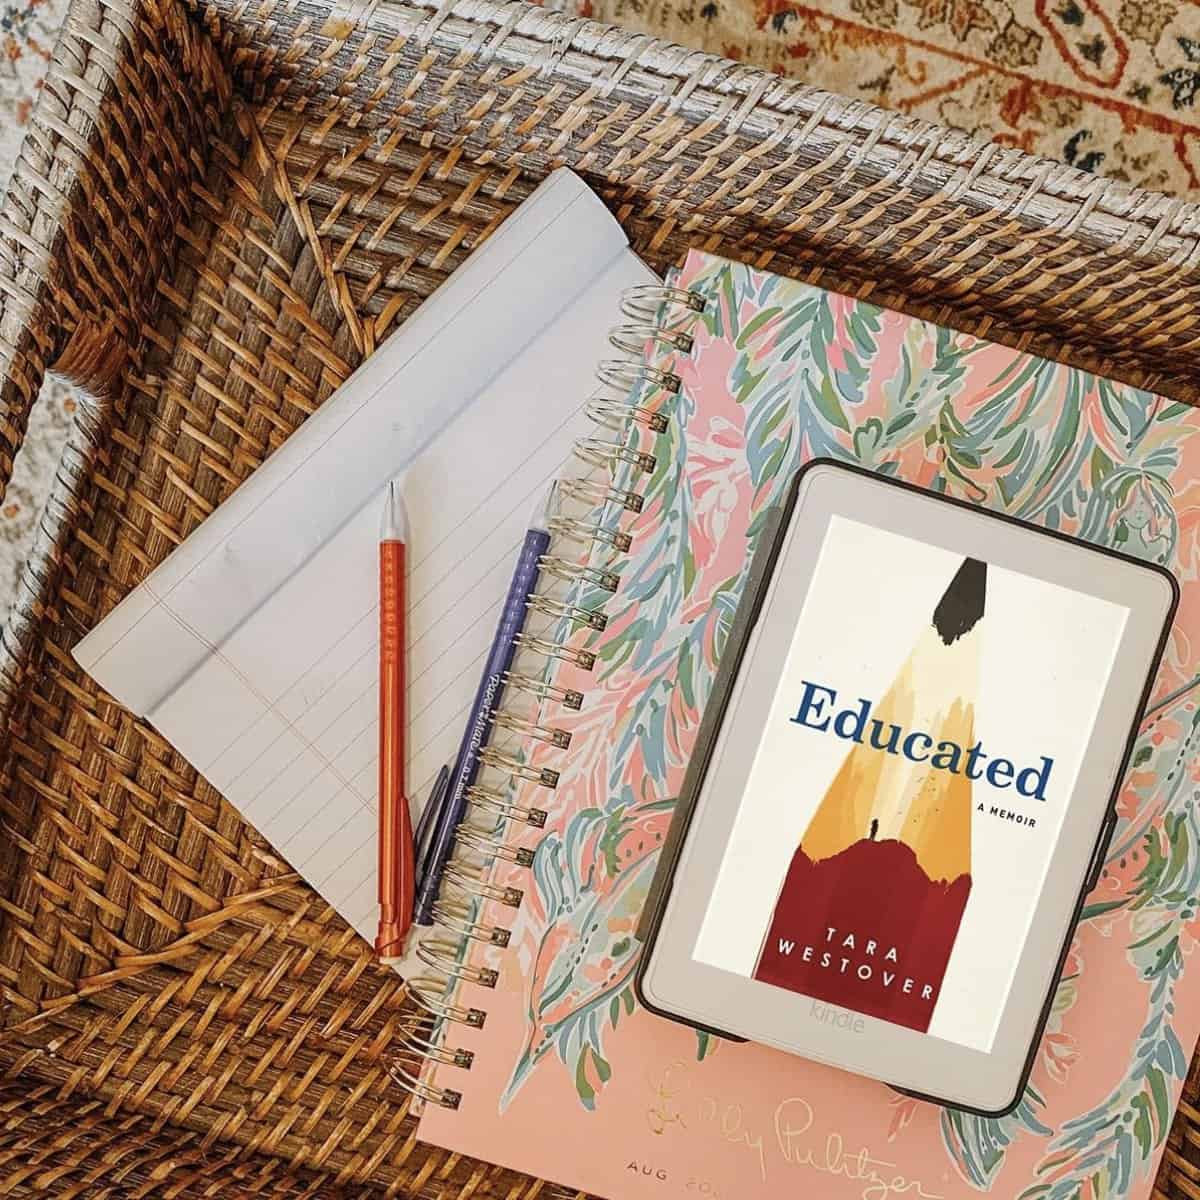 Educated by Tara Westover: Summary, Review and Quotes